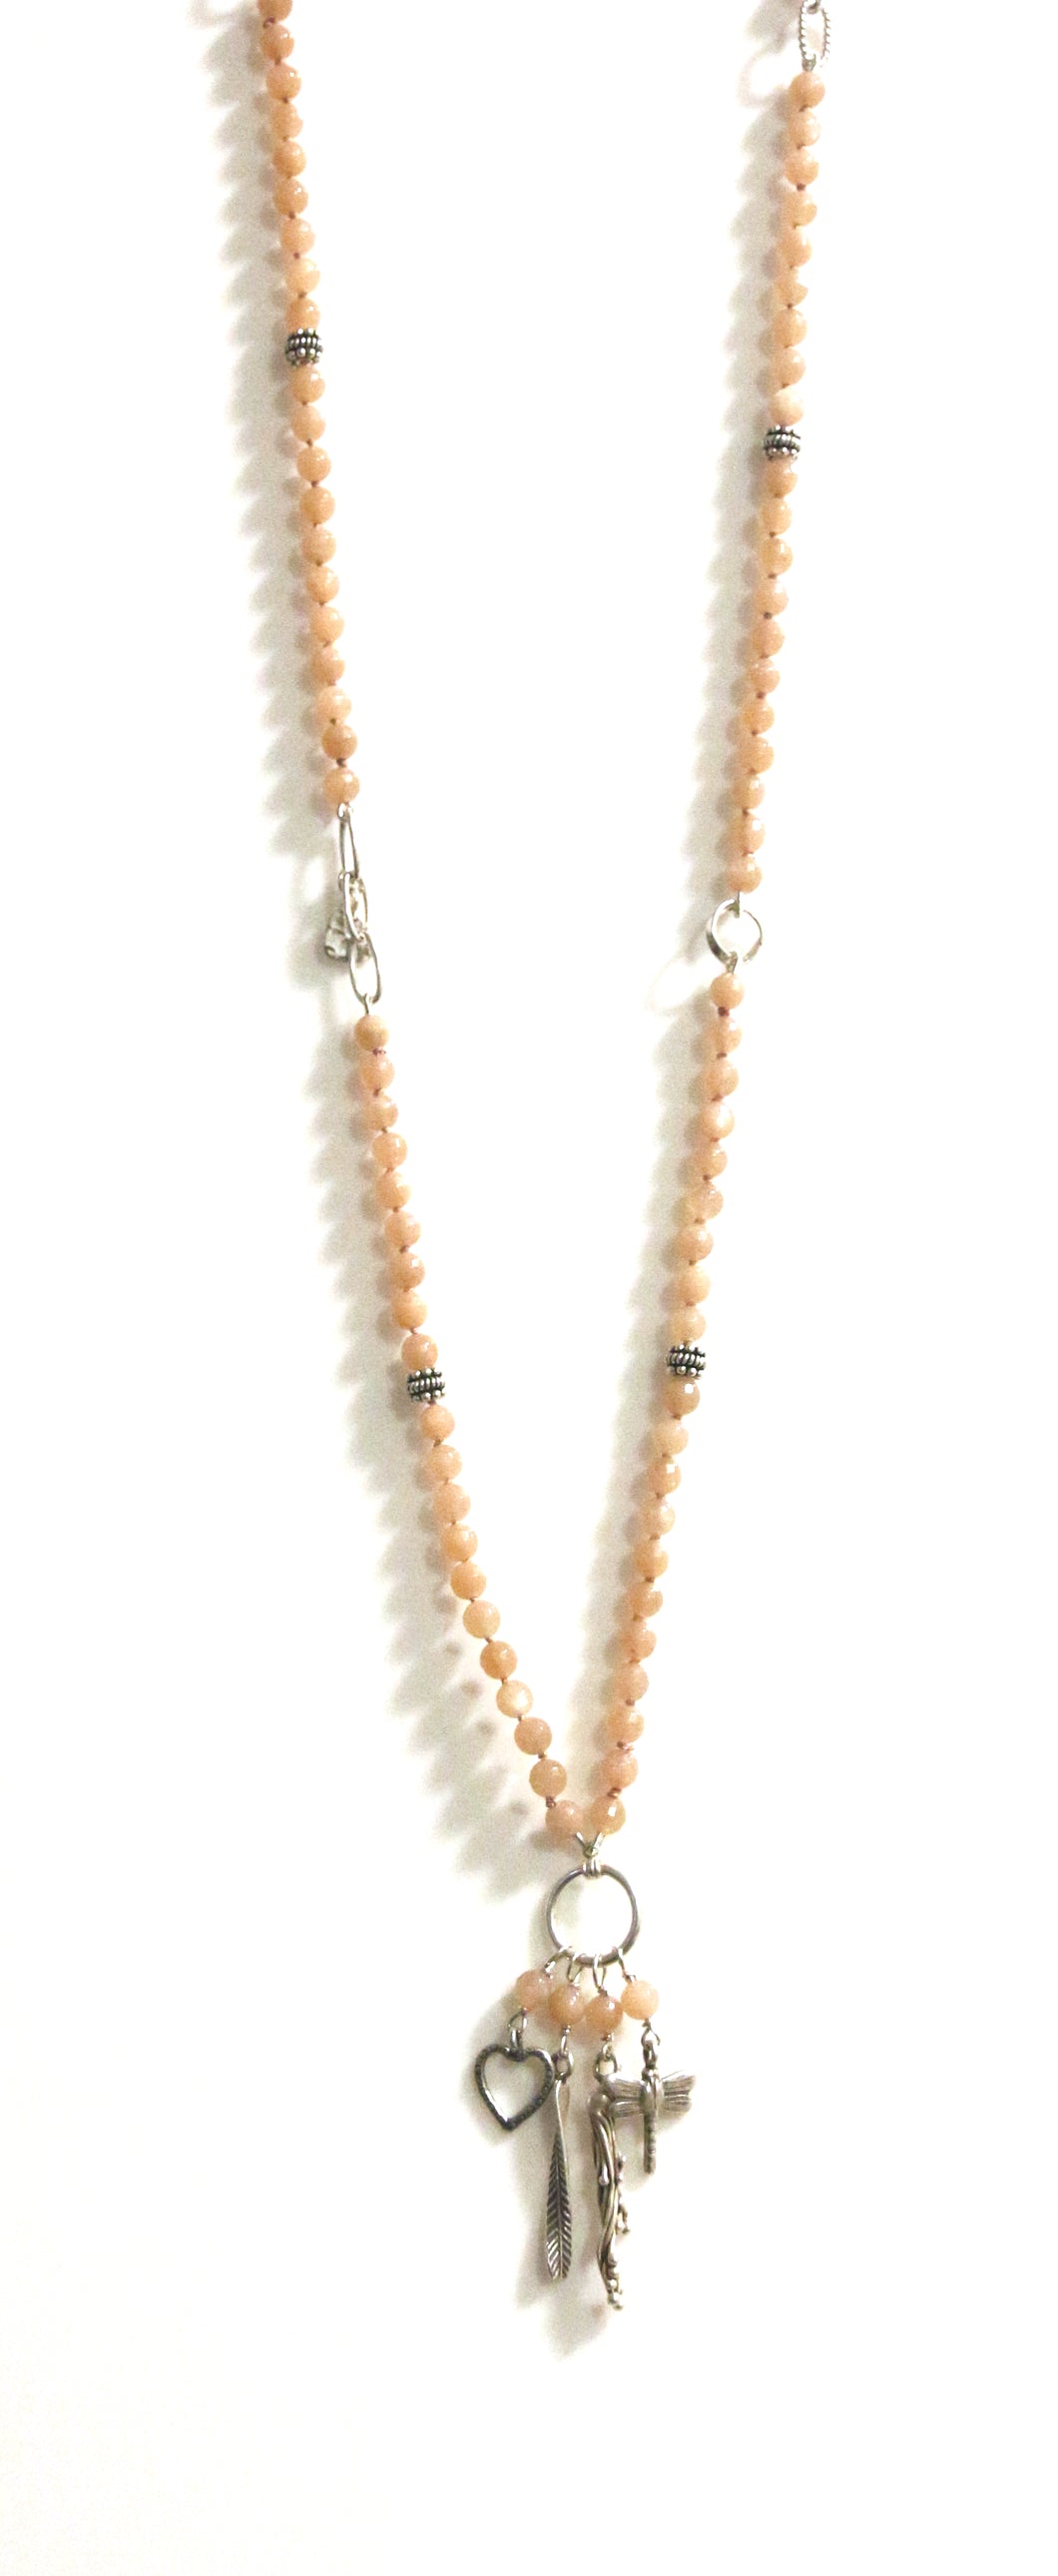 Australian Handmade Pink Long Necklace with Peach Moonstone and Sterling Silver Charms